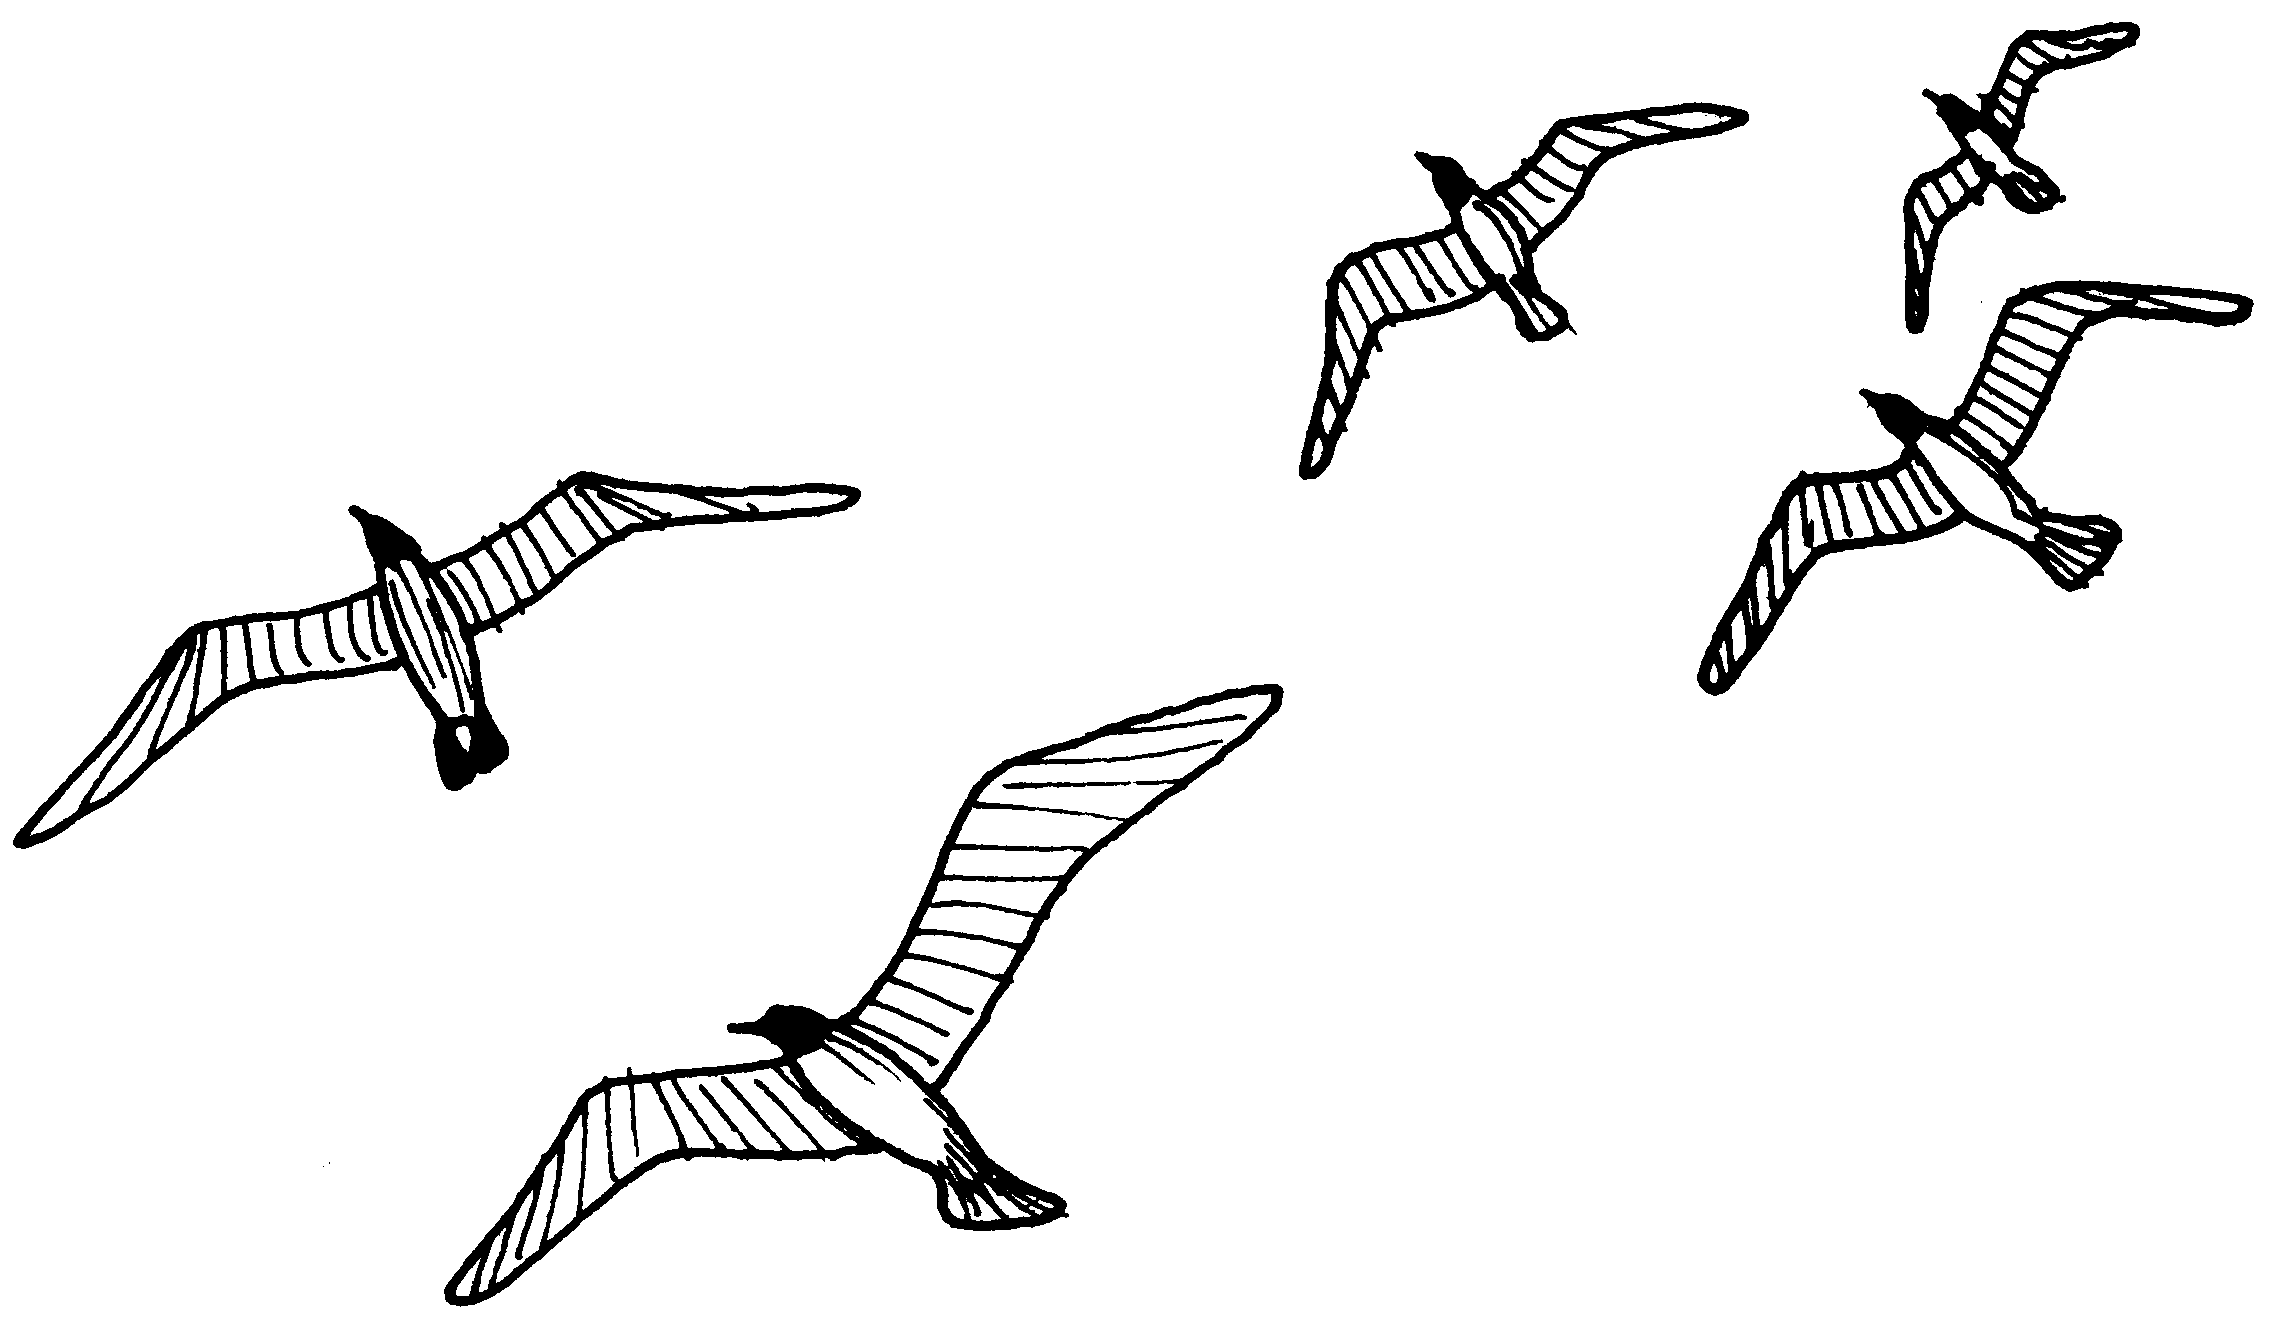 Seagull clipart free images image